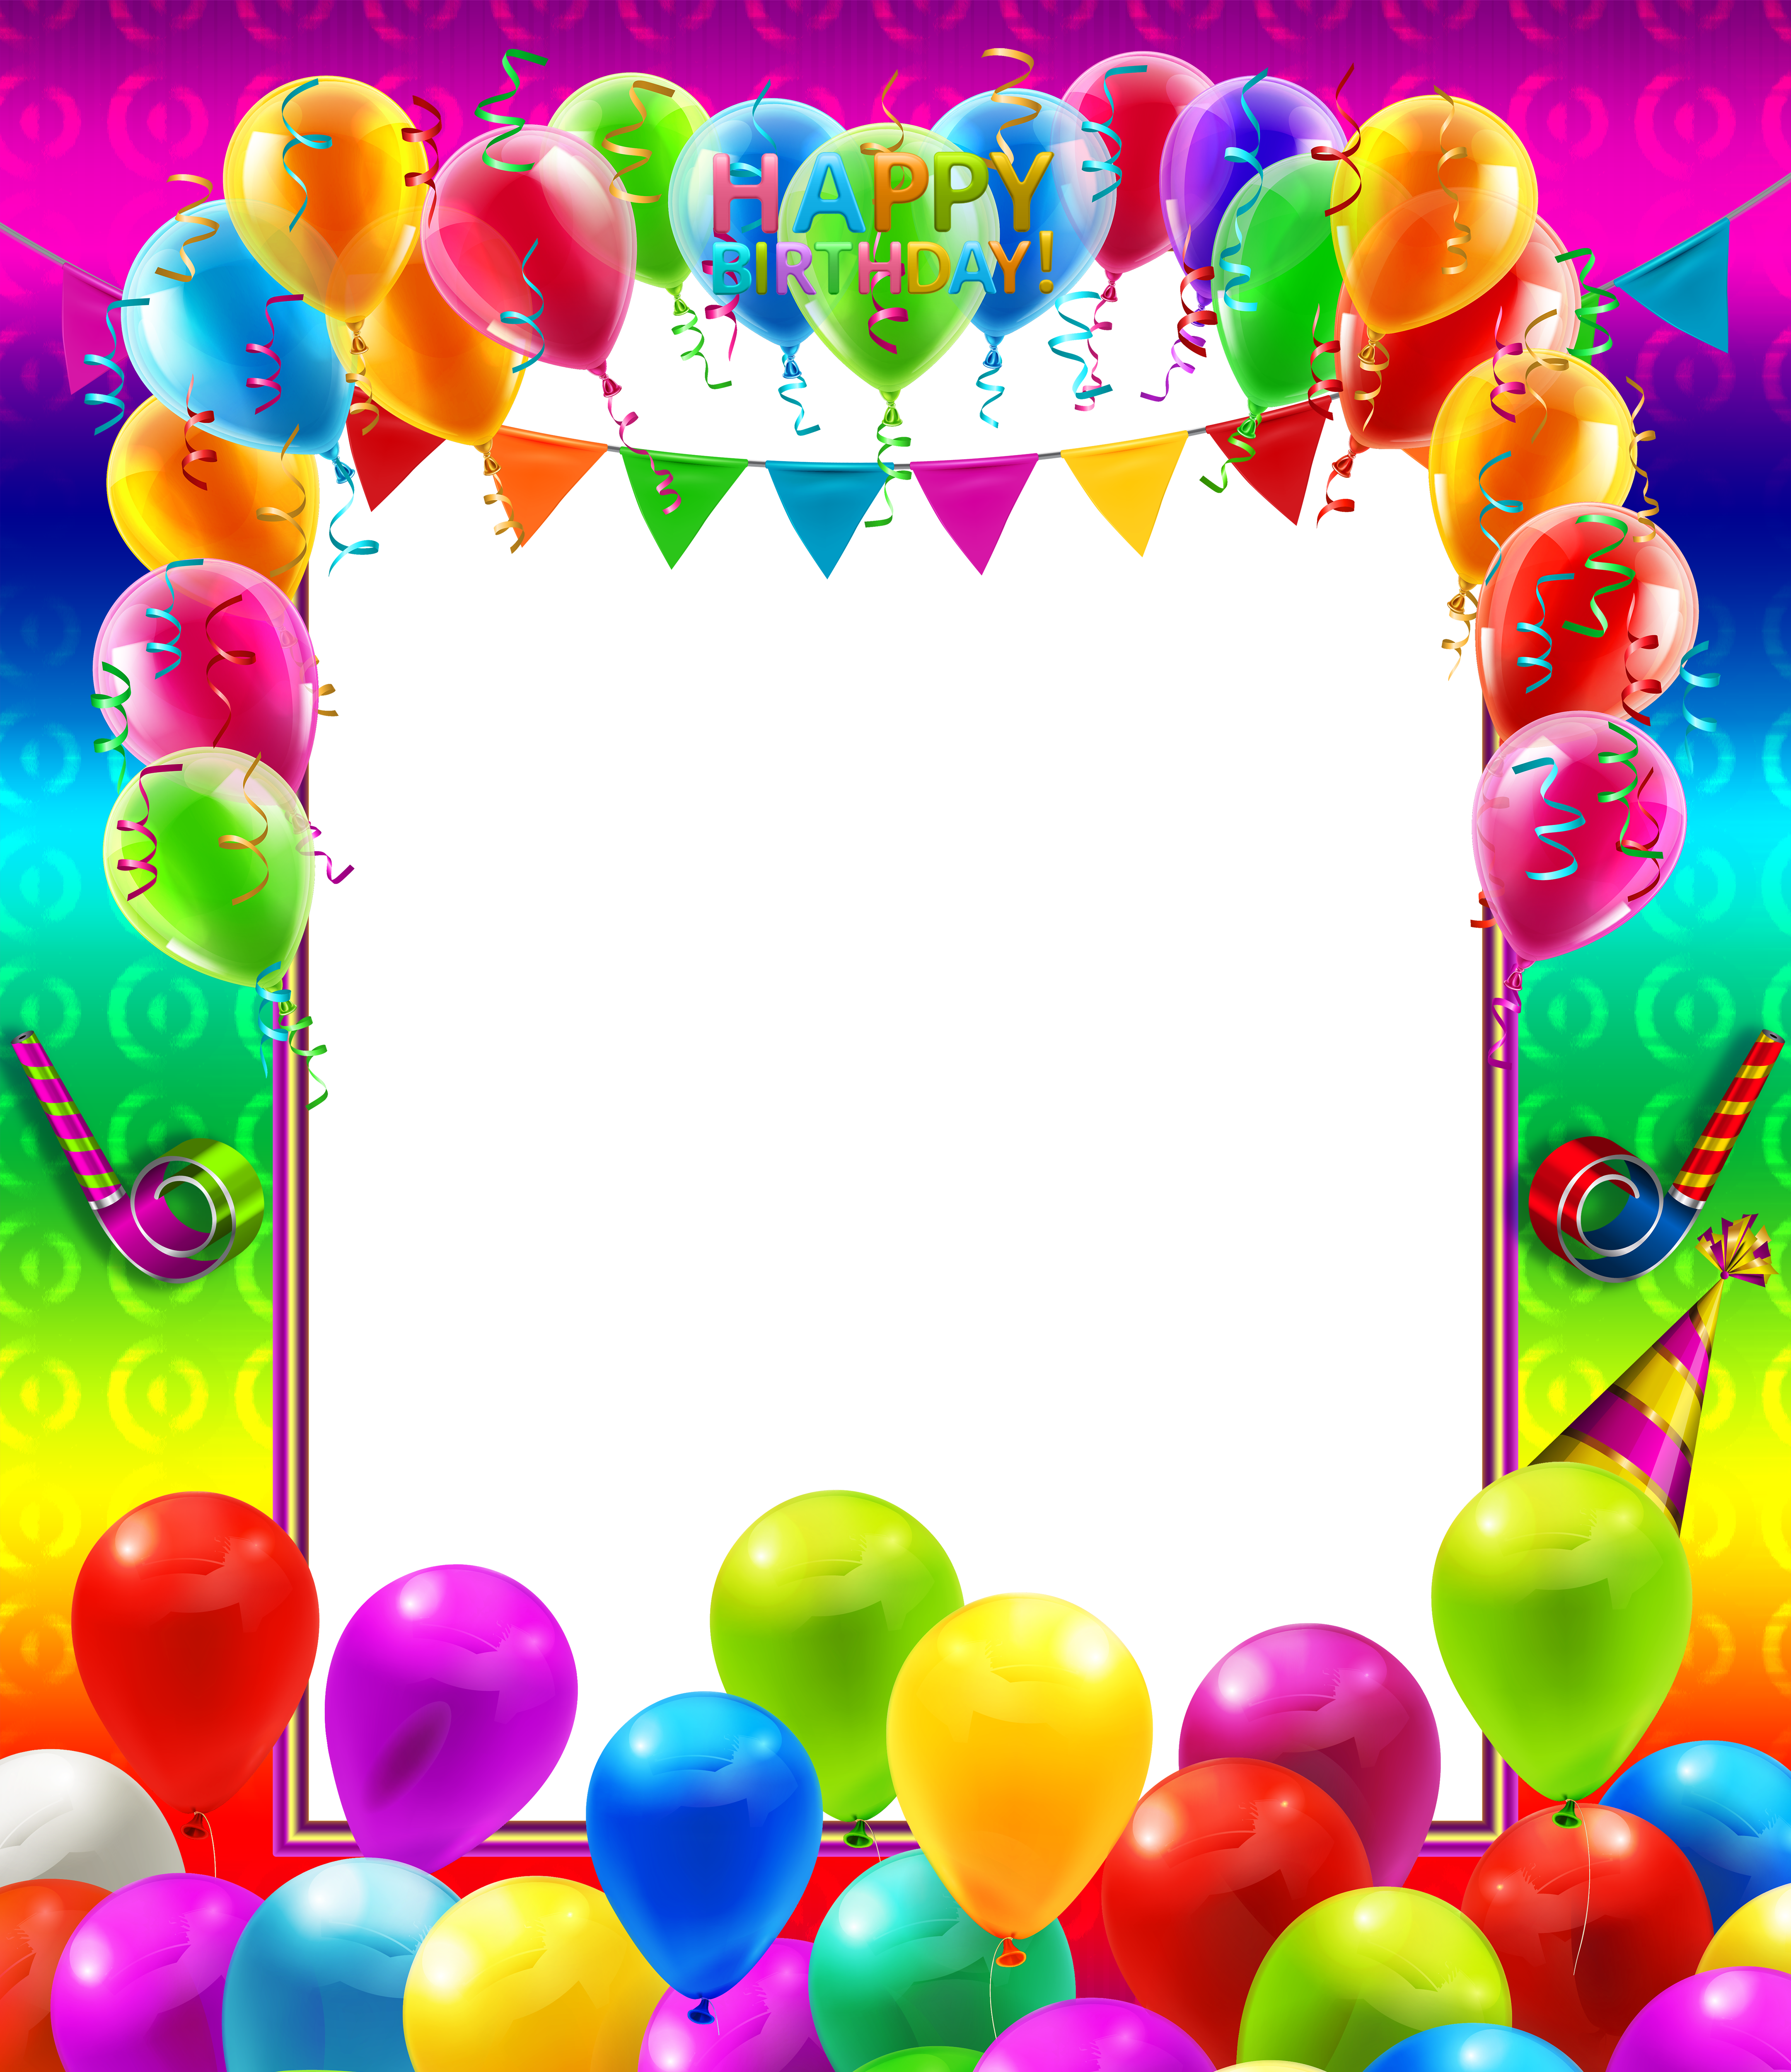 colorful frames and borders png